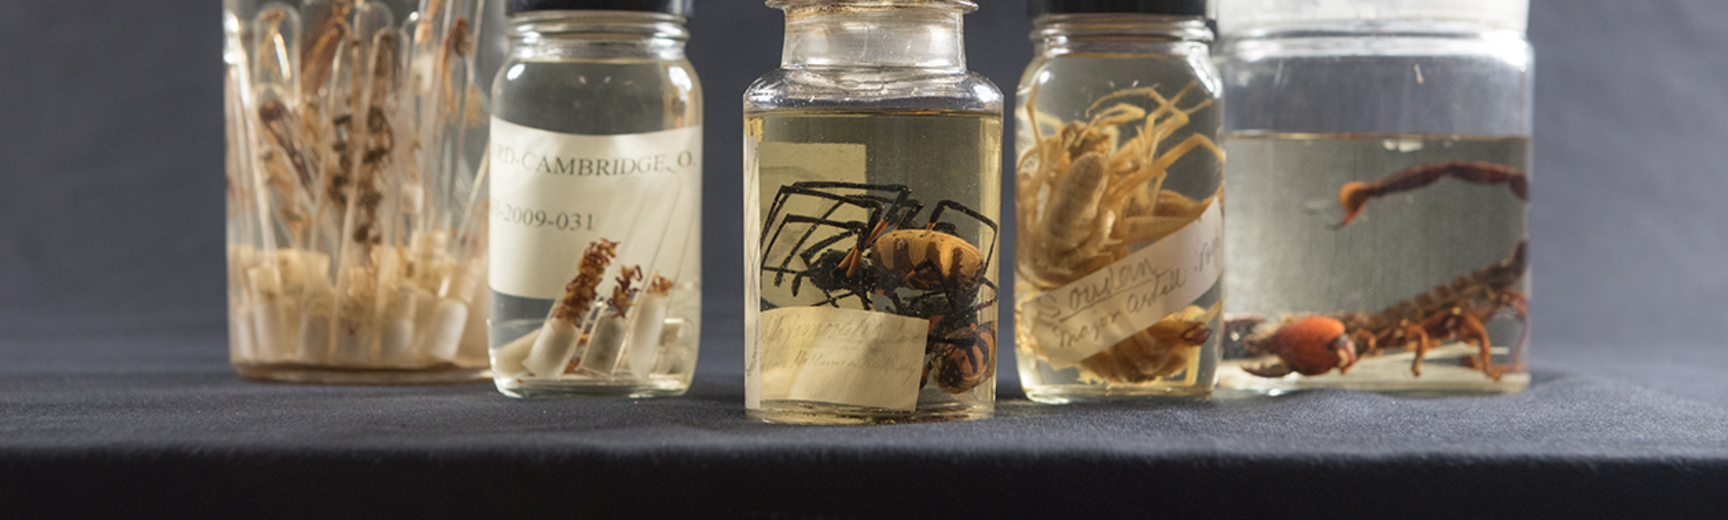 The Museum's arachnid collections